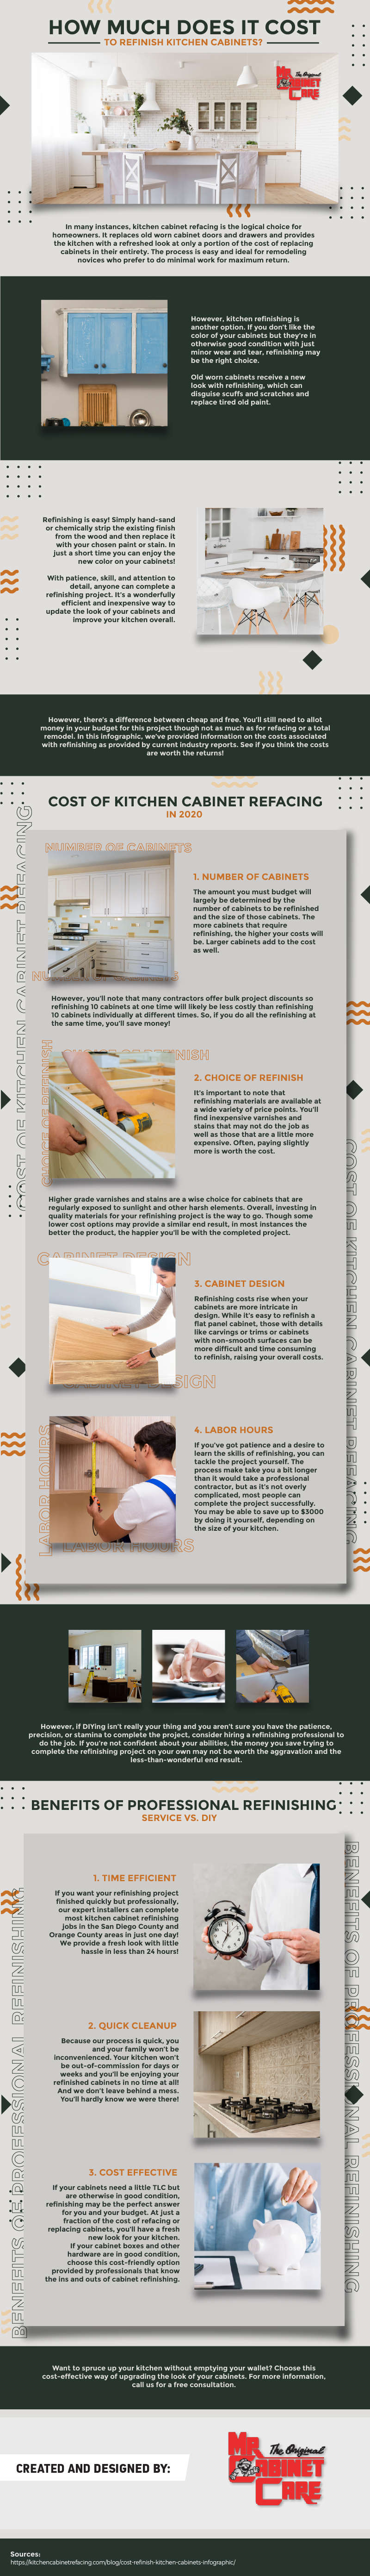 How Much Does It Cost to Refinish Kitchen Cabinets - Infographic